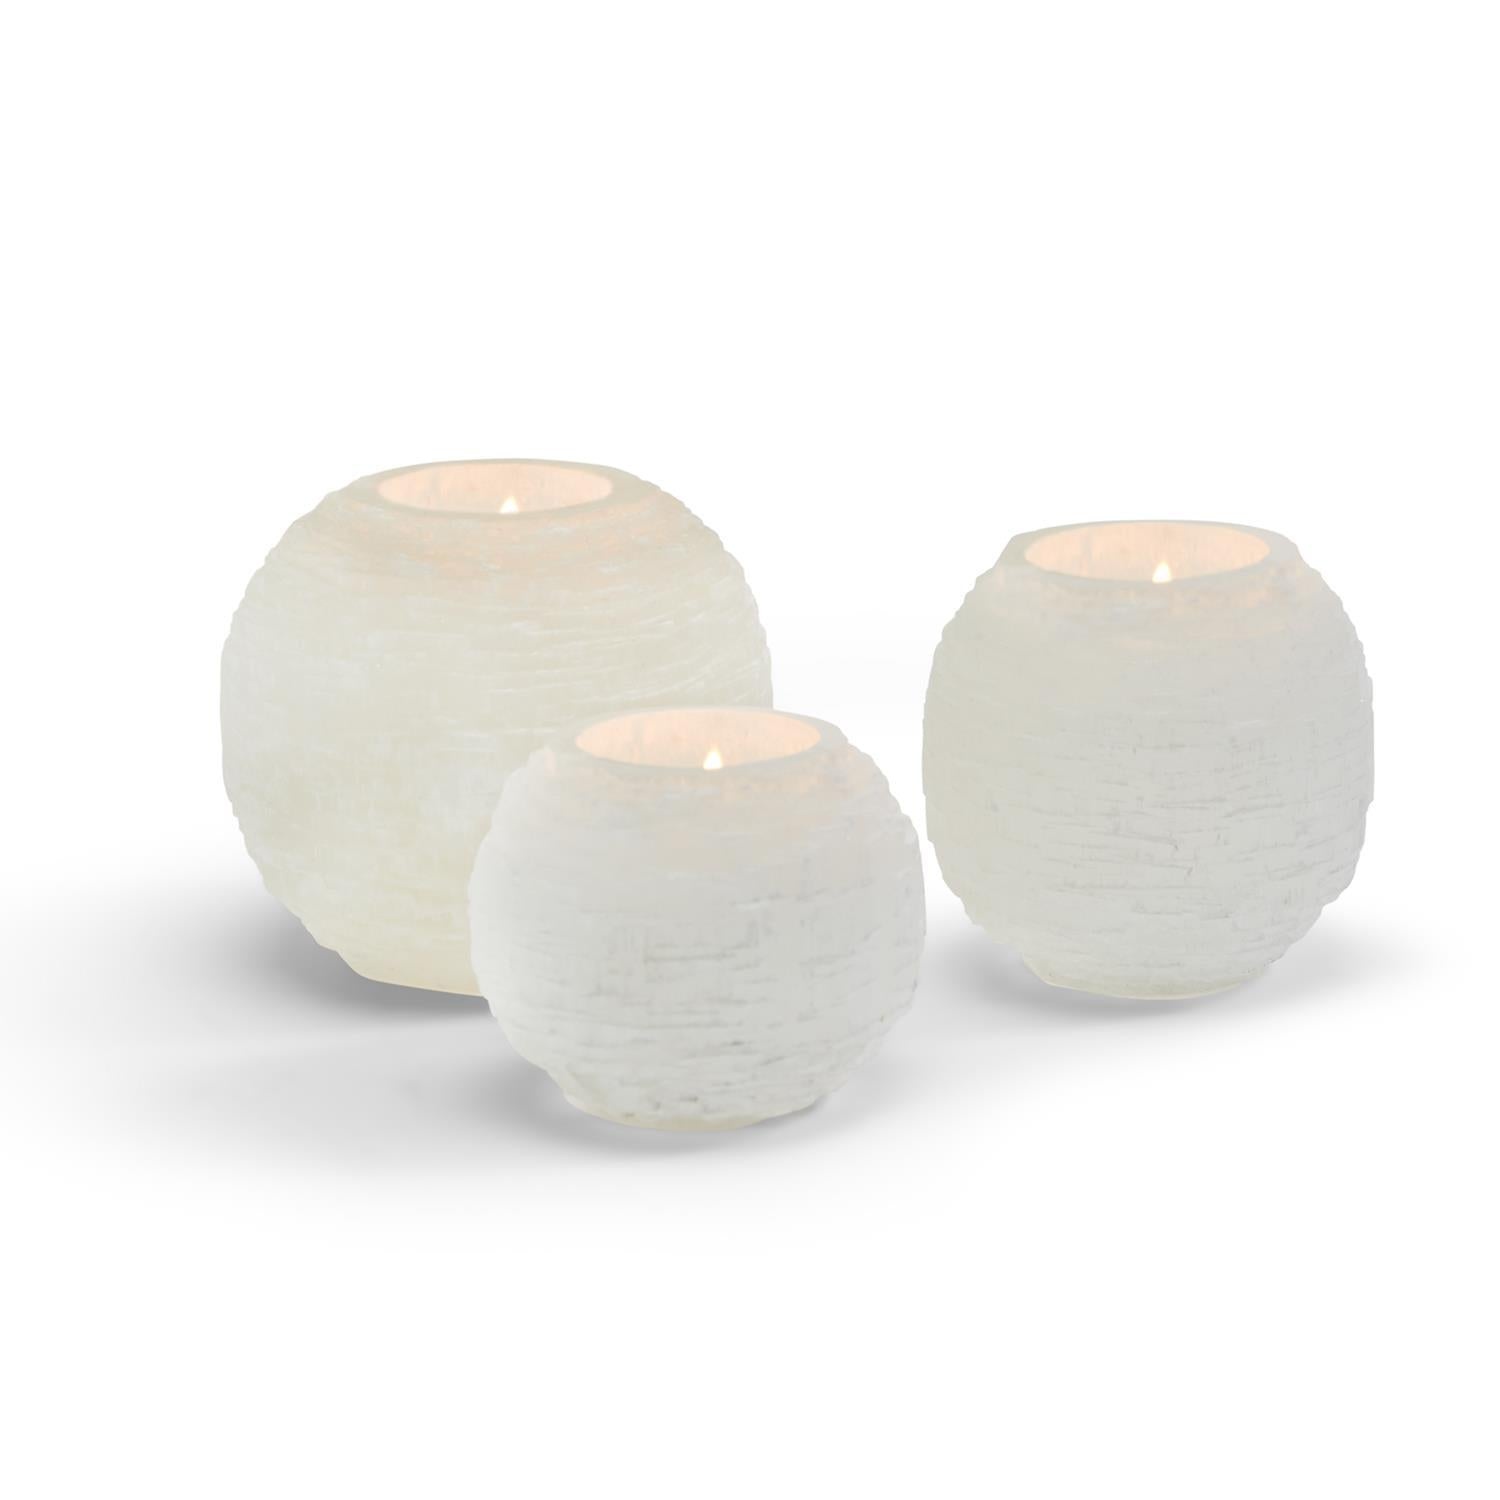 Two's Company Selenite Crystal Sphere Candle Holder - Large